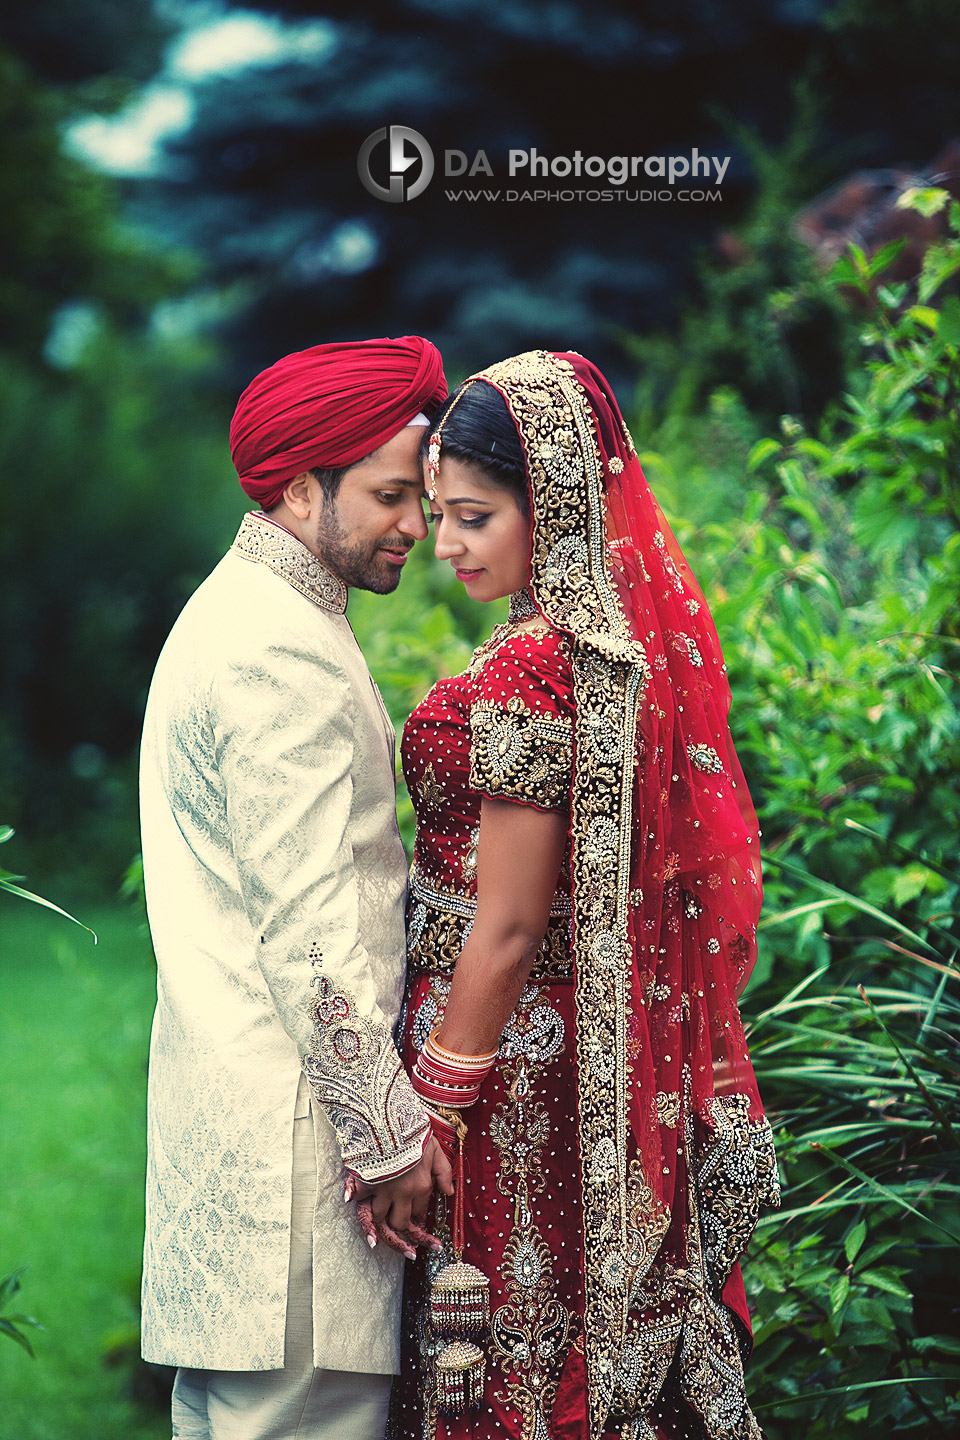 Our wedding day - Sikh Indian Wedding Photographer